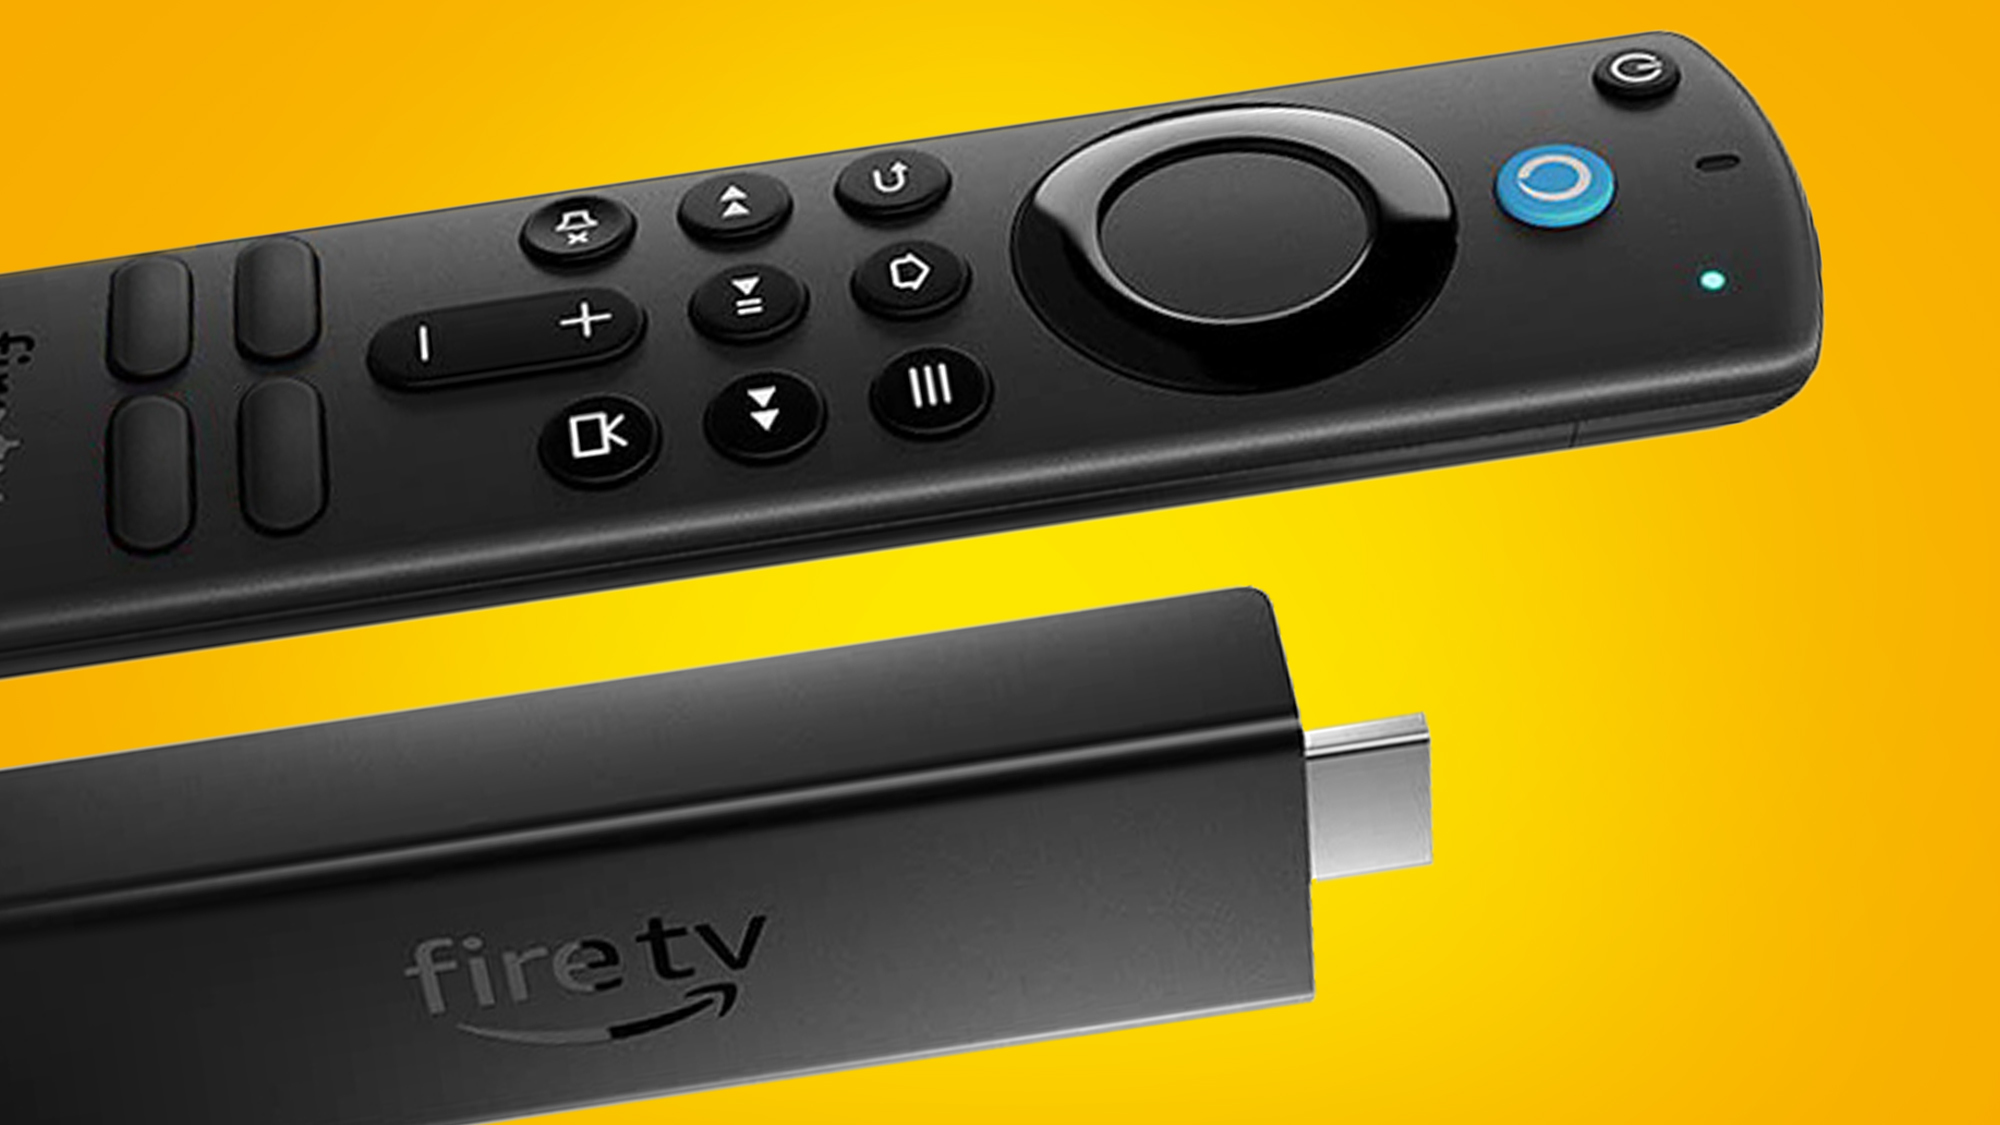 launches 4K Fire TVs and a new Fire TV Stick